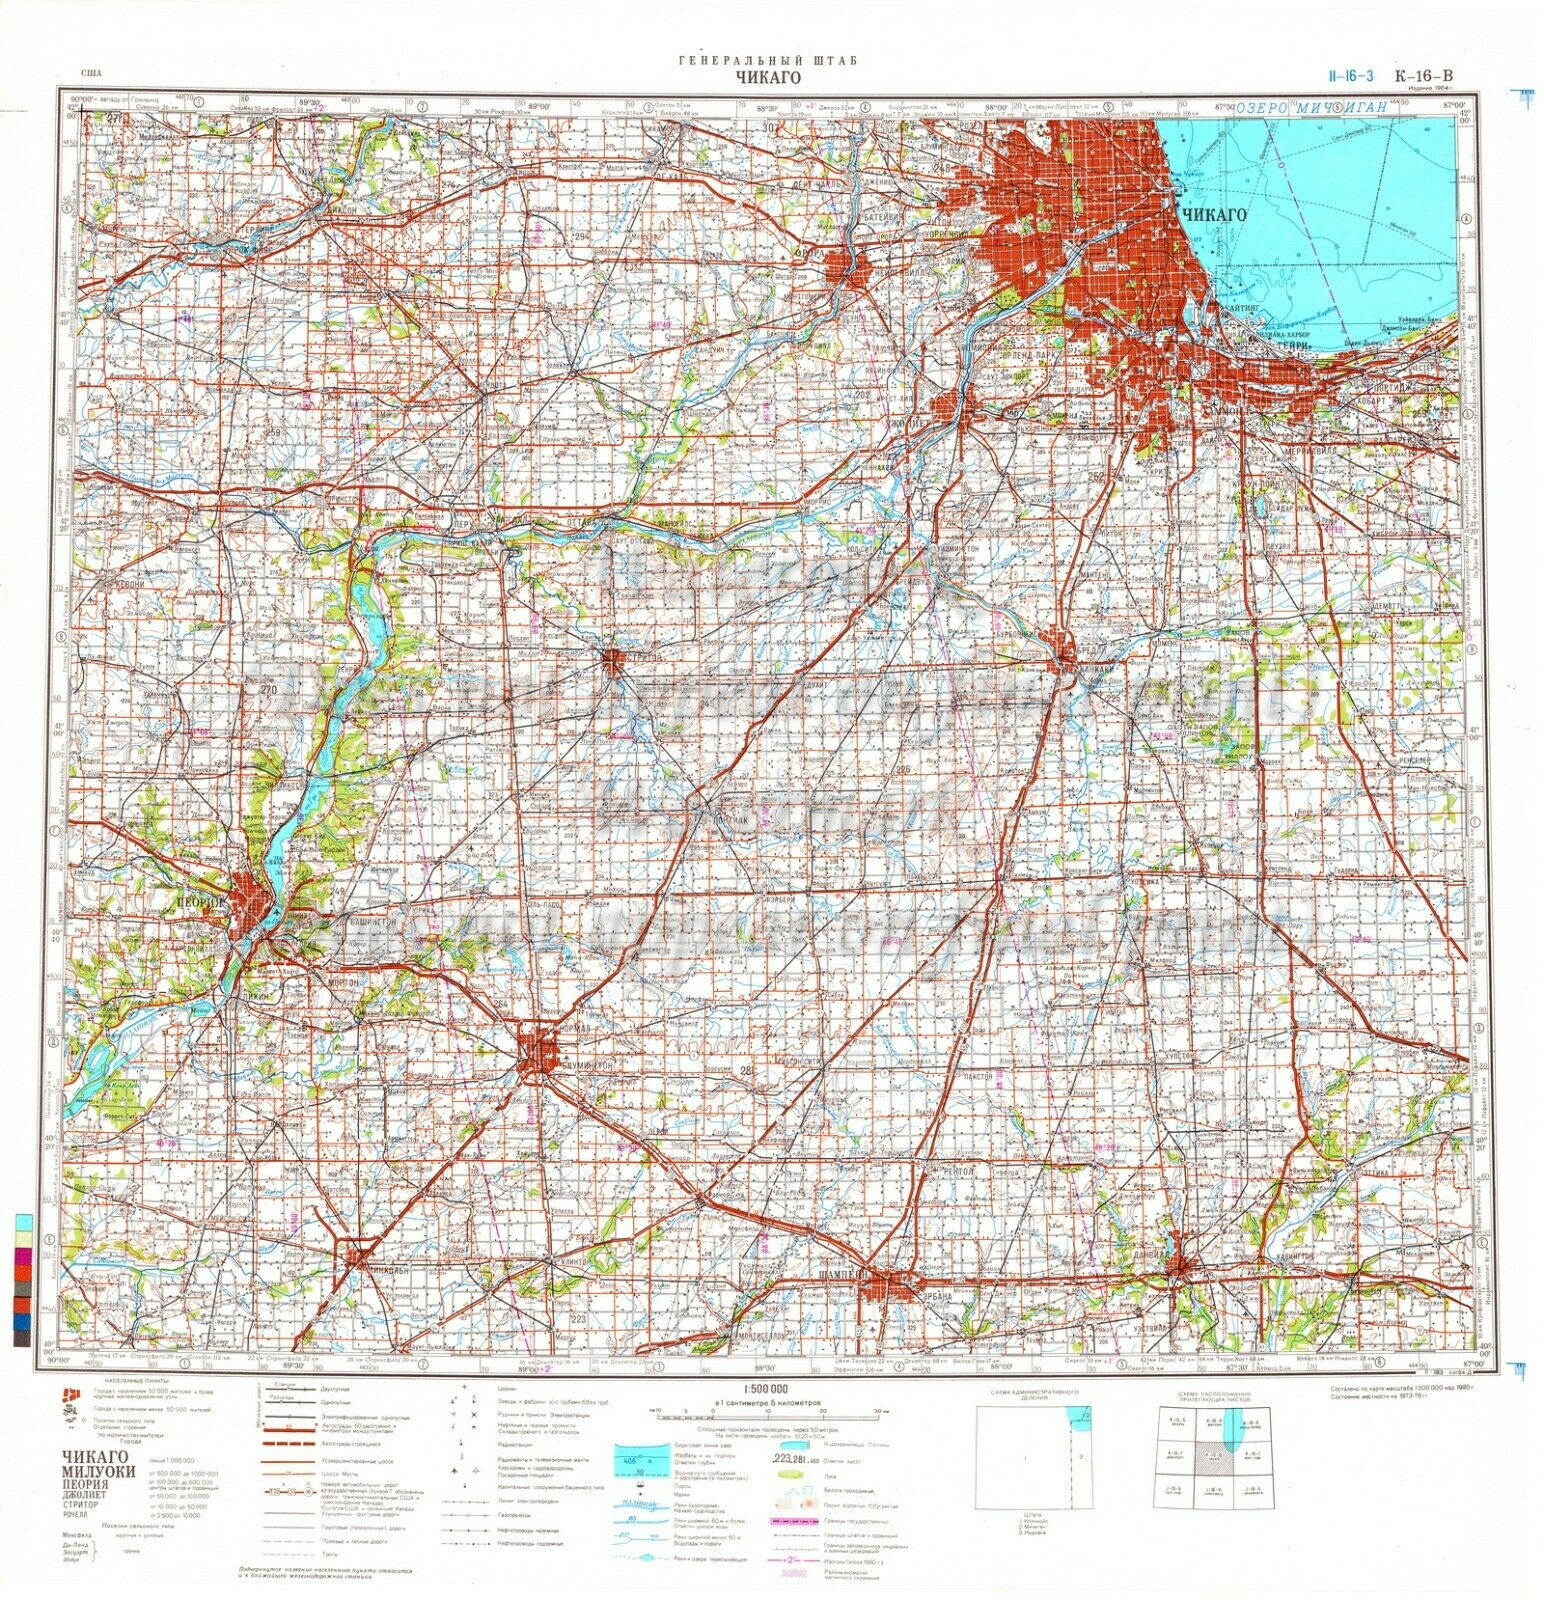 Soviet Russian Topographic Map Chicago Usa 1:500 000 Ed.1984 Poster Print